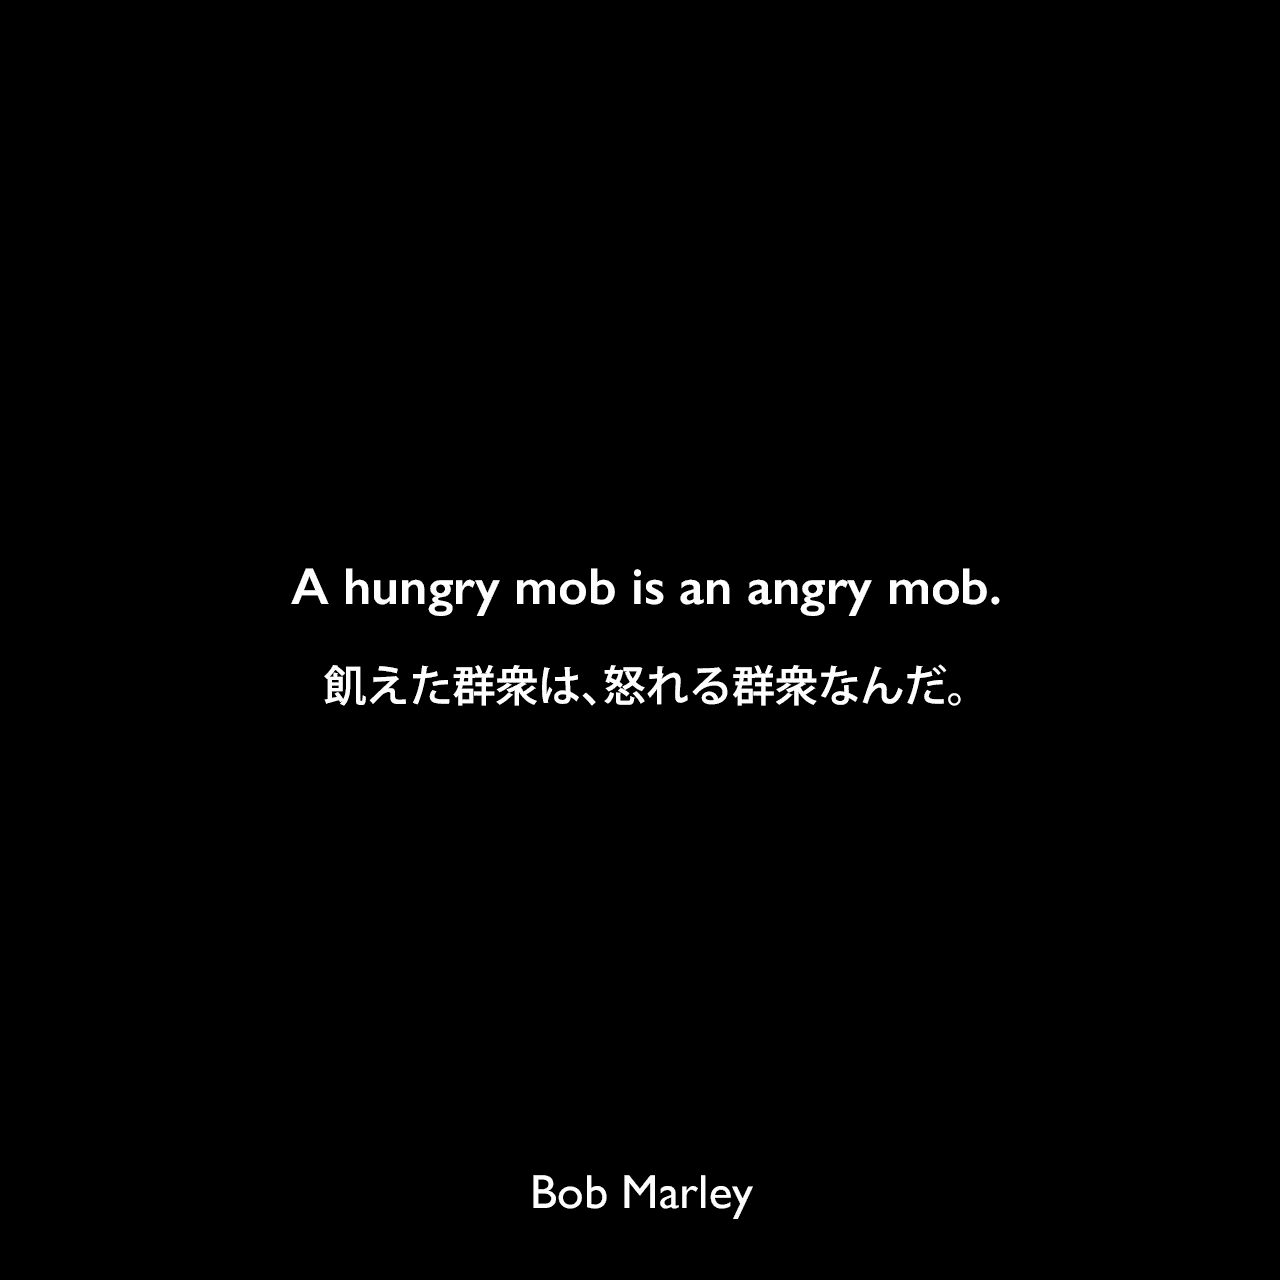 A hungry mob is an angry mob.飢えた群衆は、怒れる群衆なんだ。Bob Marley